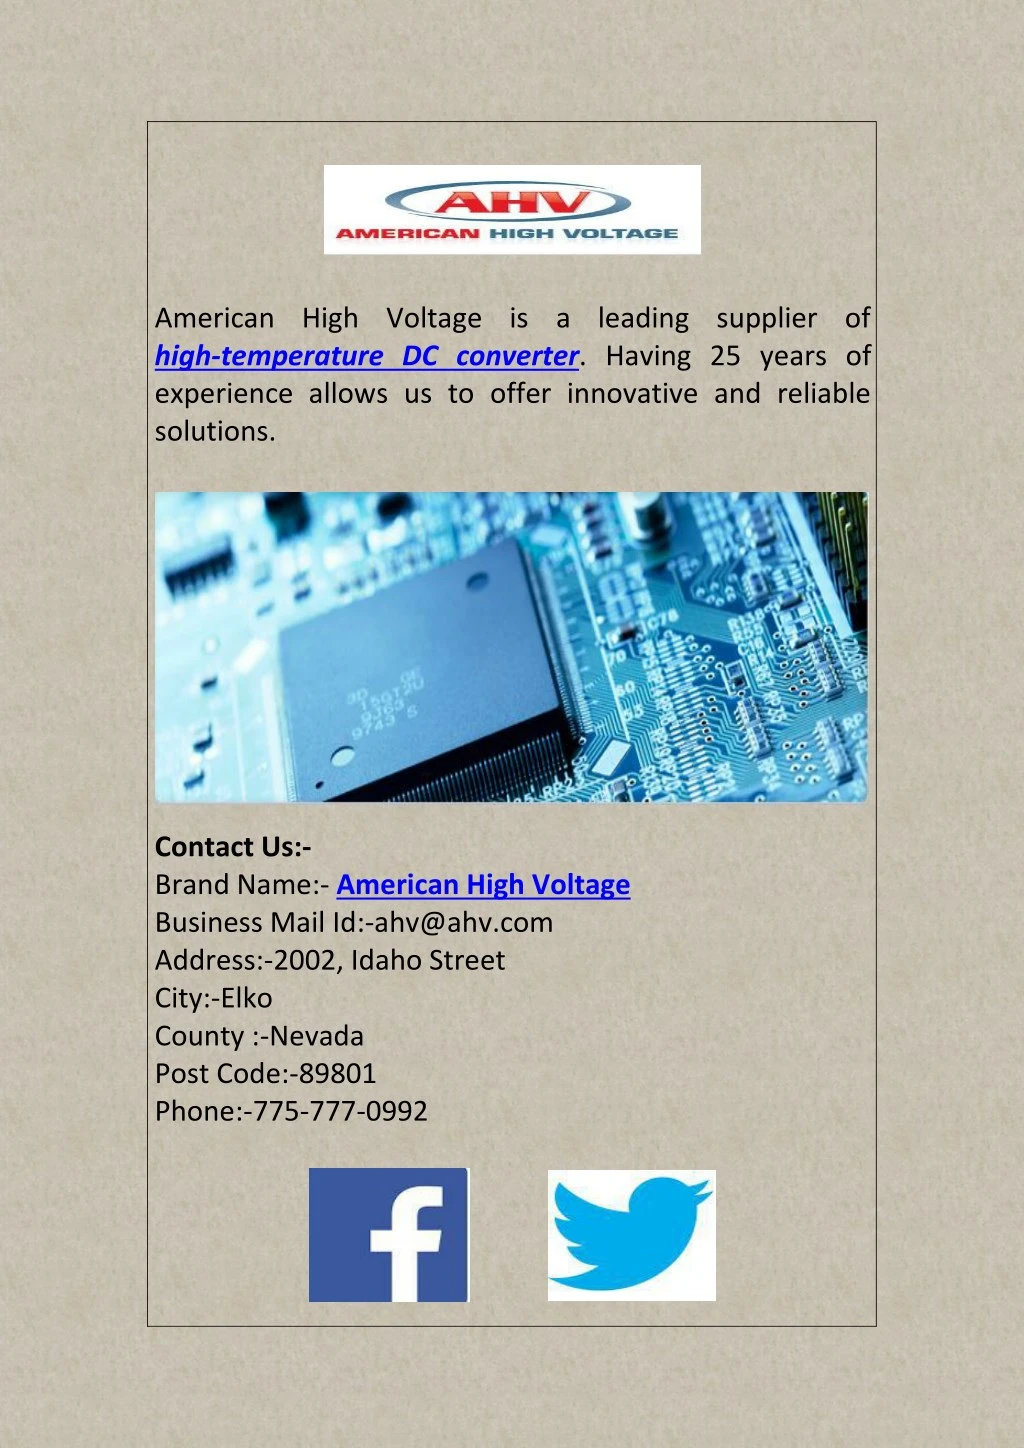 american high voltage is a leading supplier